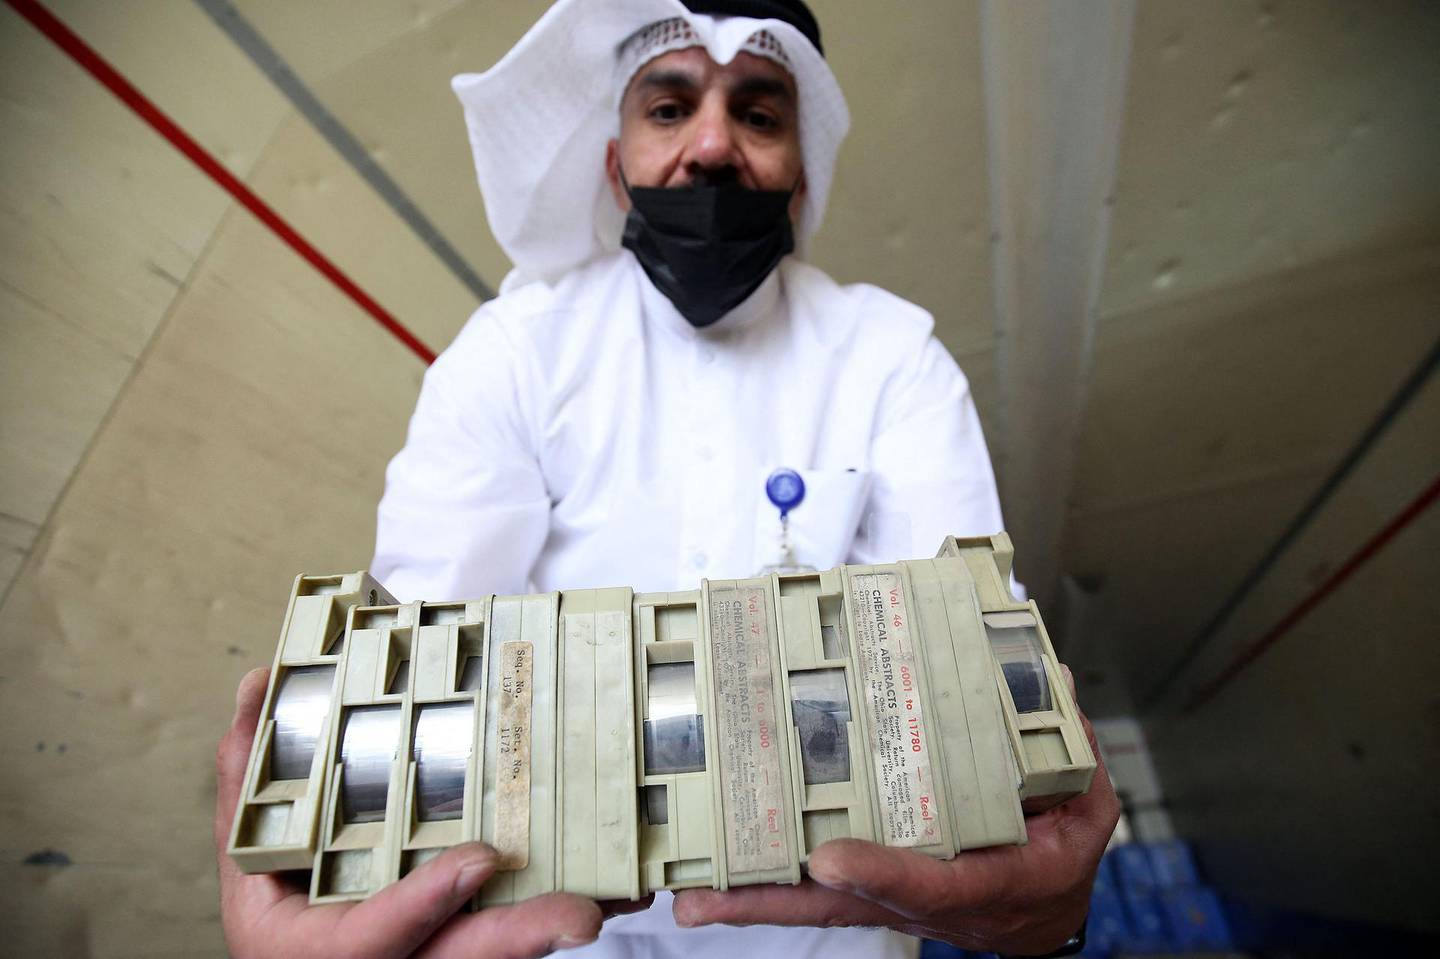 Employee at the Kuwaiti Information Ministry Essam al-Said inspects boxes in the back of a truck containing Kuwaiti archives seized during the Iraqi invasion of the Gulf emirate in 1990, after their restitution by Iraqi authorities in Kuwait City, on March 28, 2021. / AFP / YASSER AL-ZAYYAT
